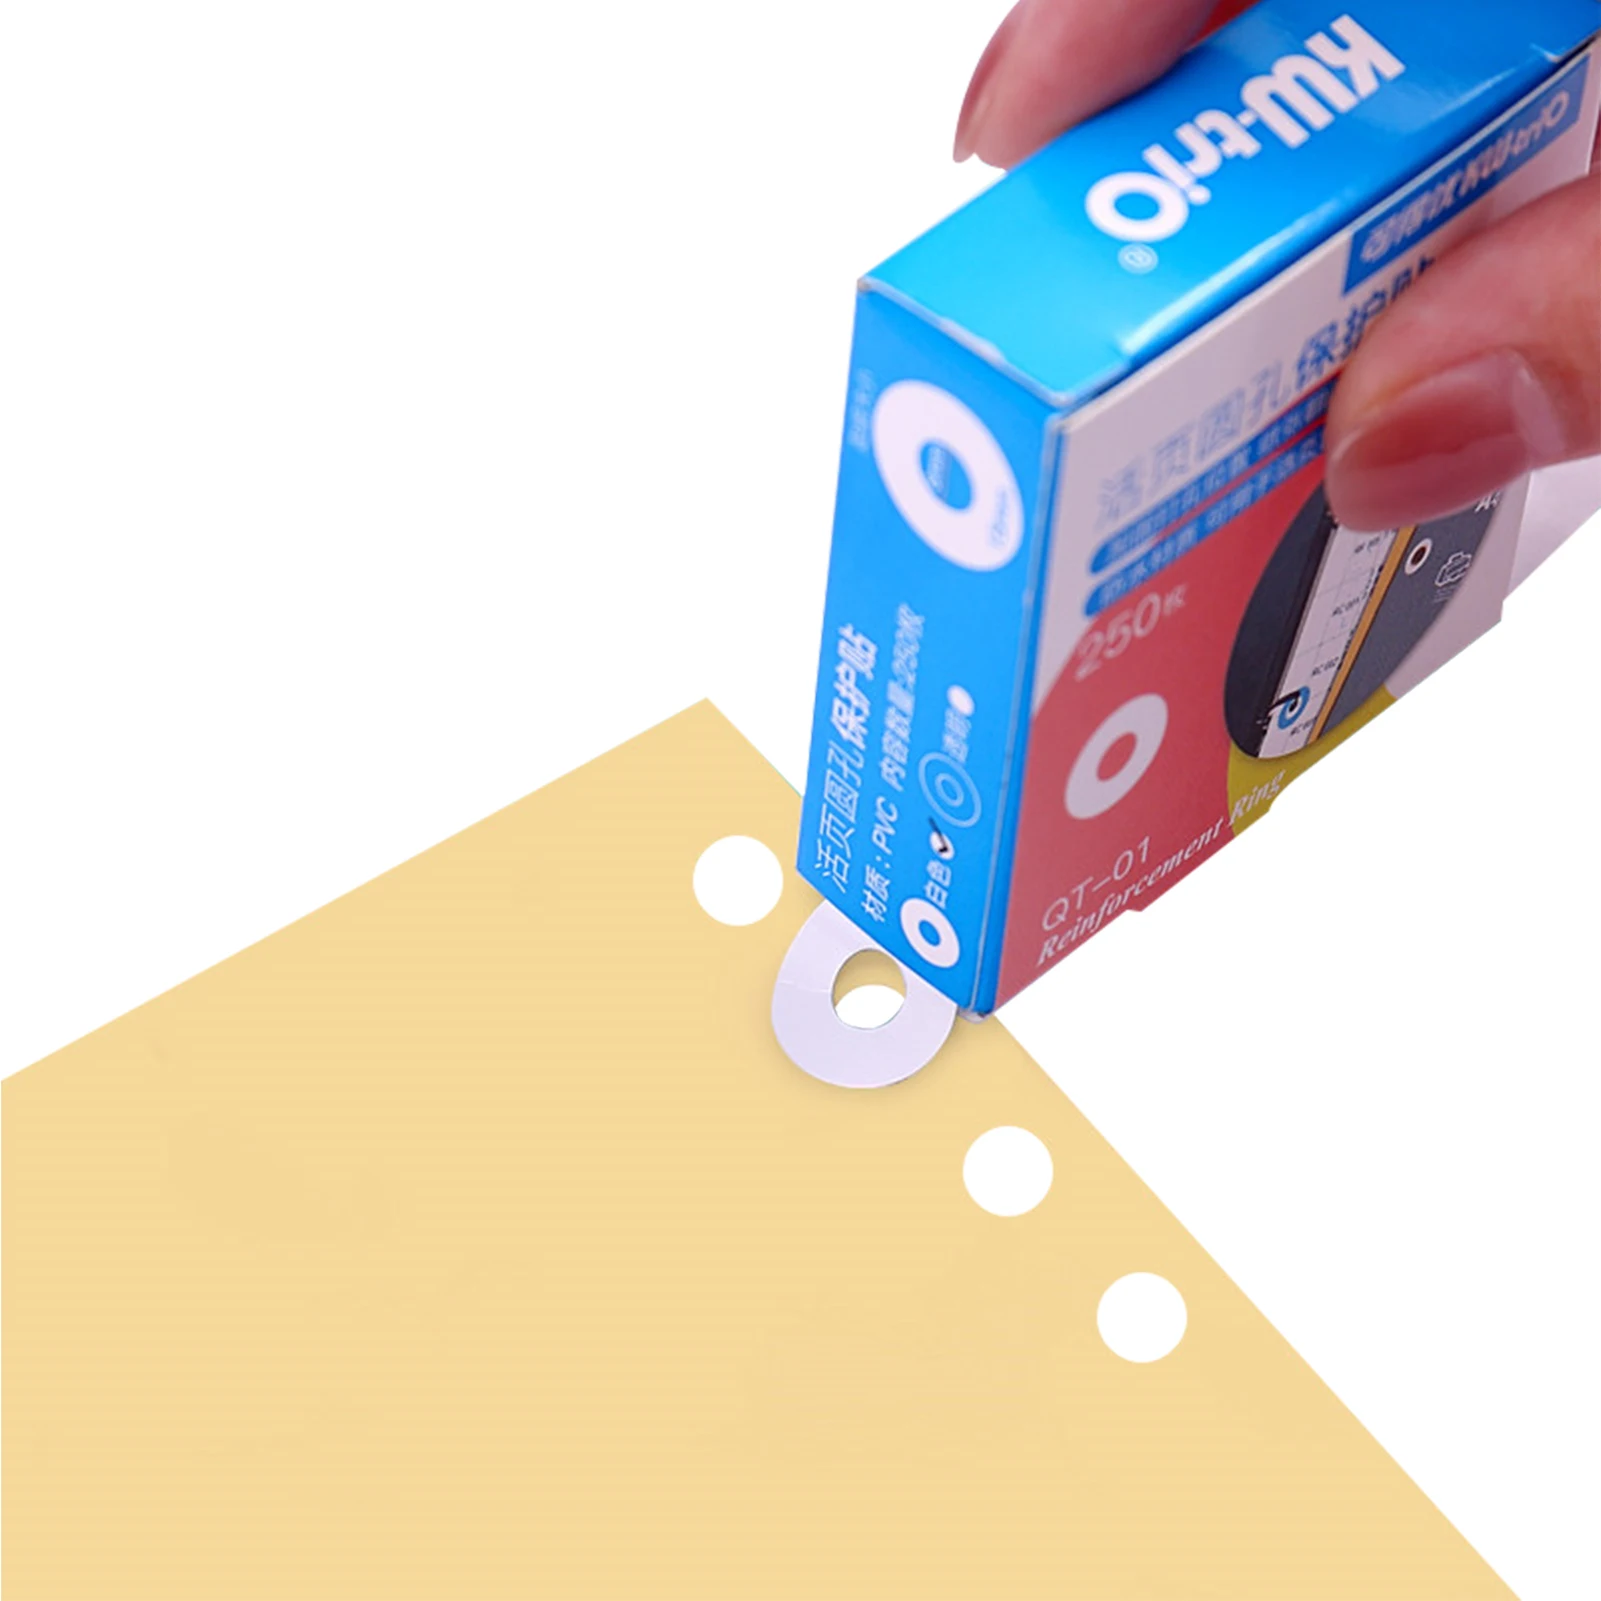 Hole Punch Reinforcers Stickers, PVC Waterproof Small Volume Hole